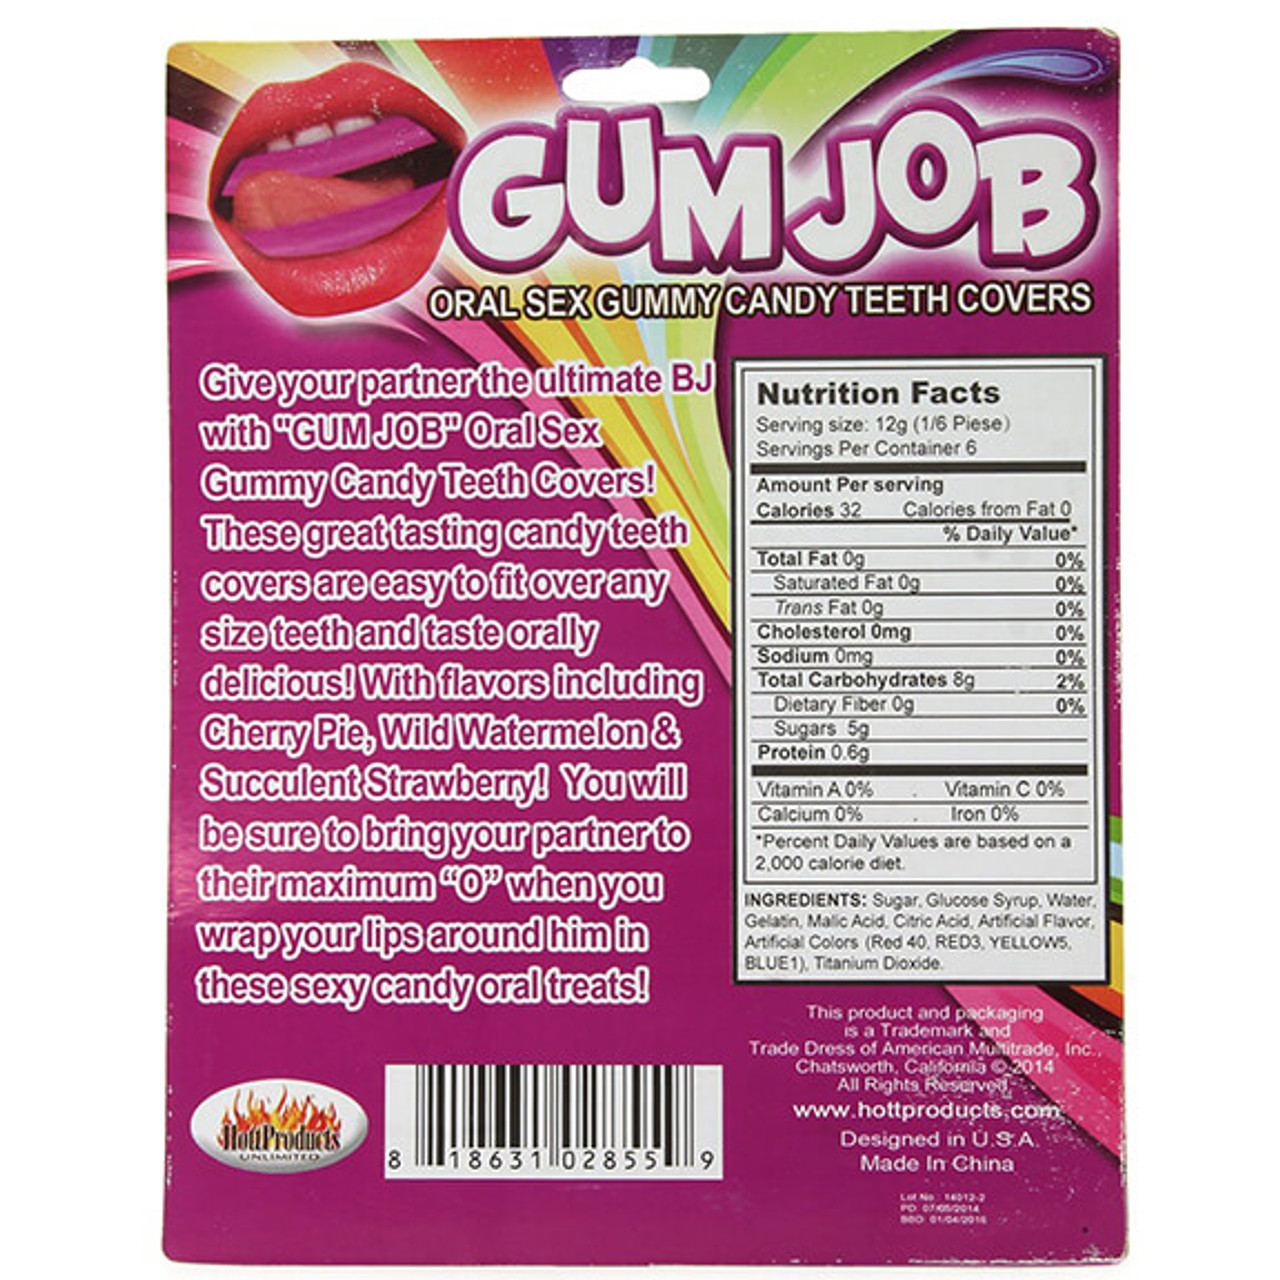 Gum Job Oral Sex Gummy Candy Teeth Covers Tabutoys image